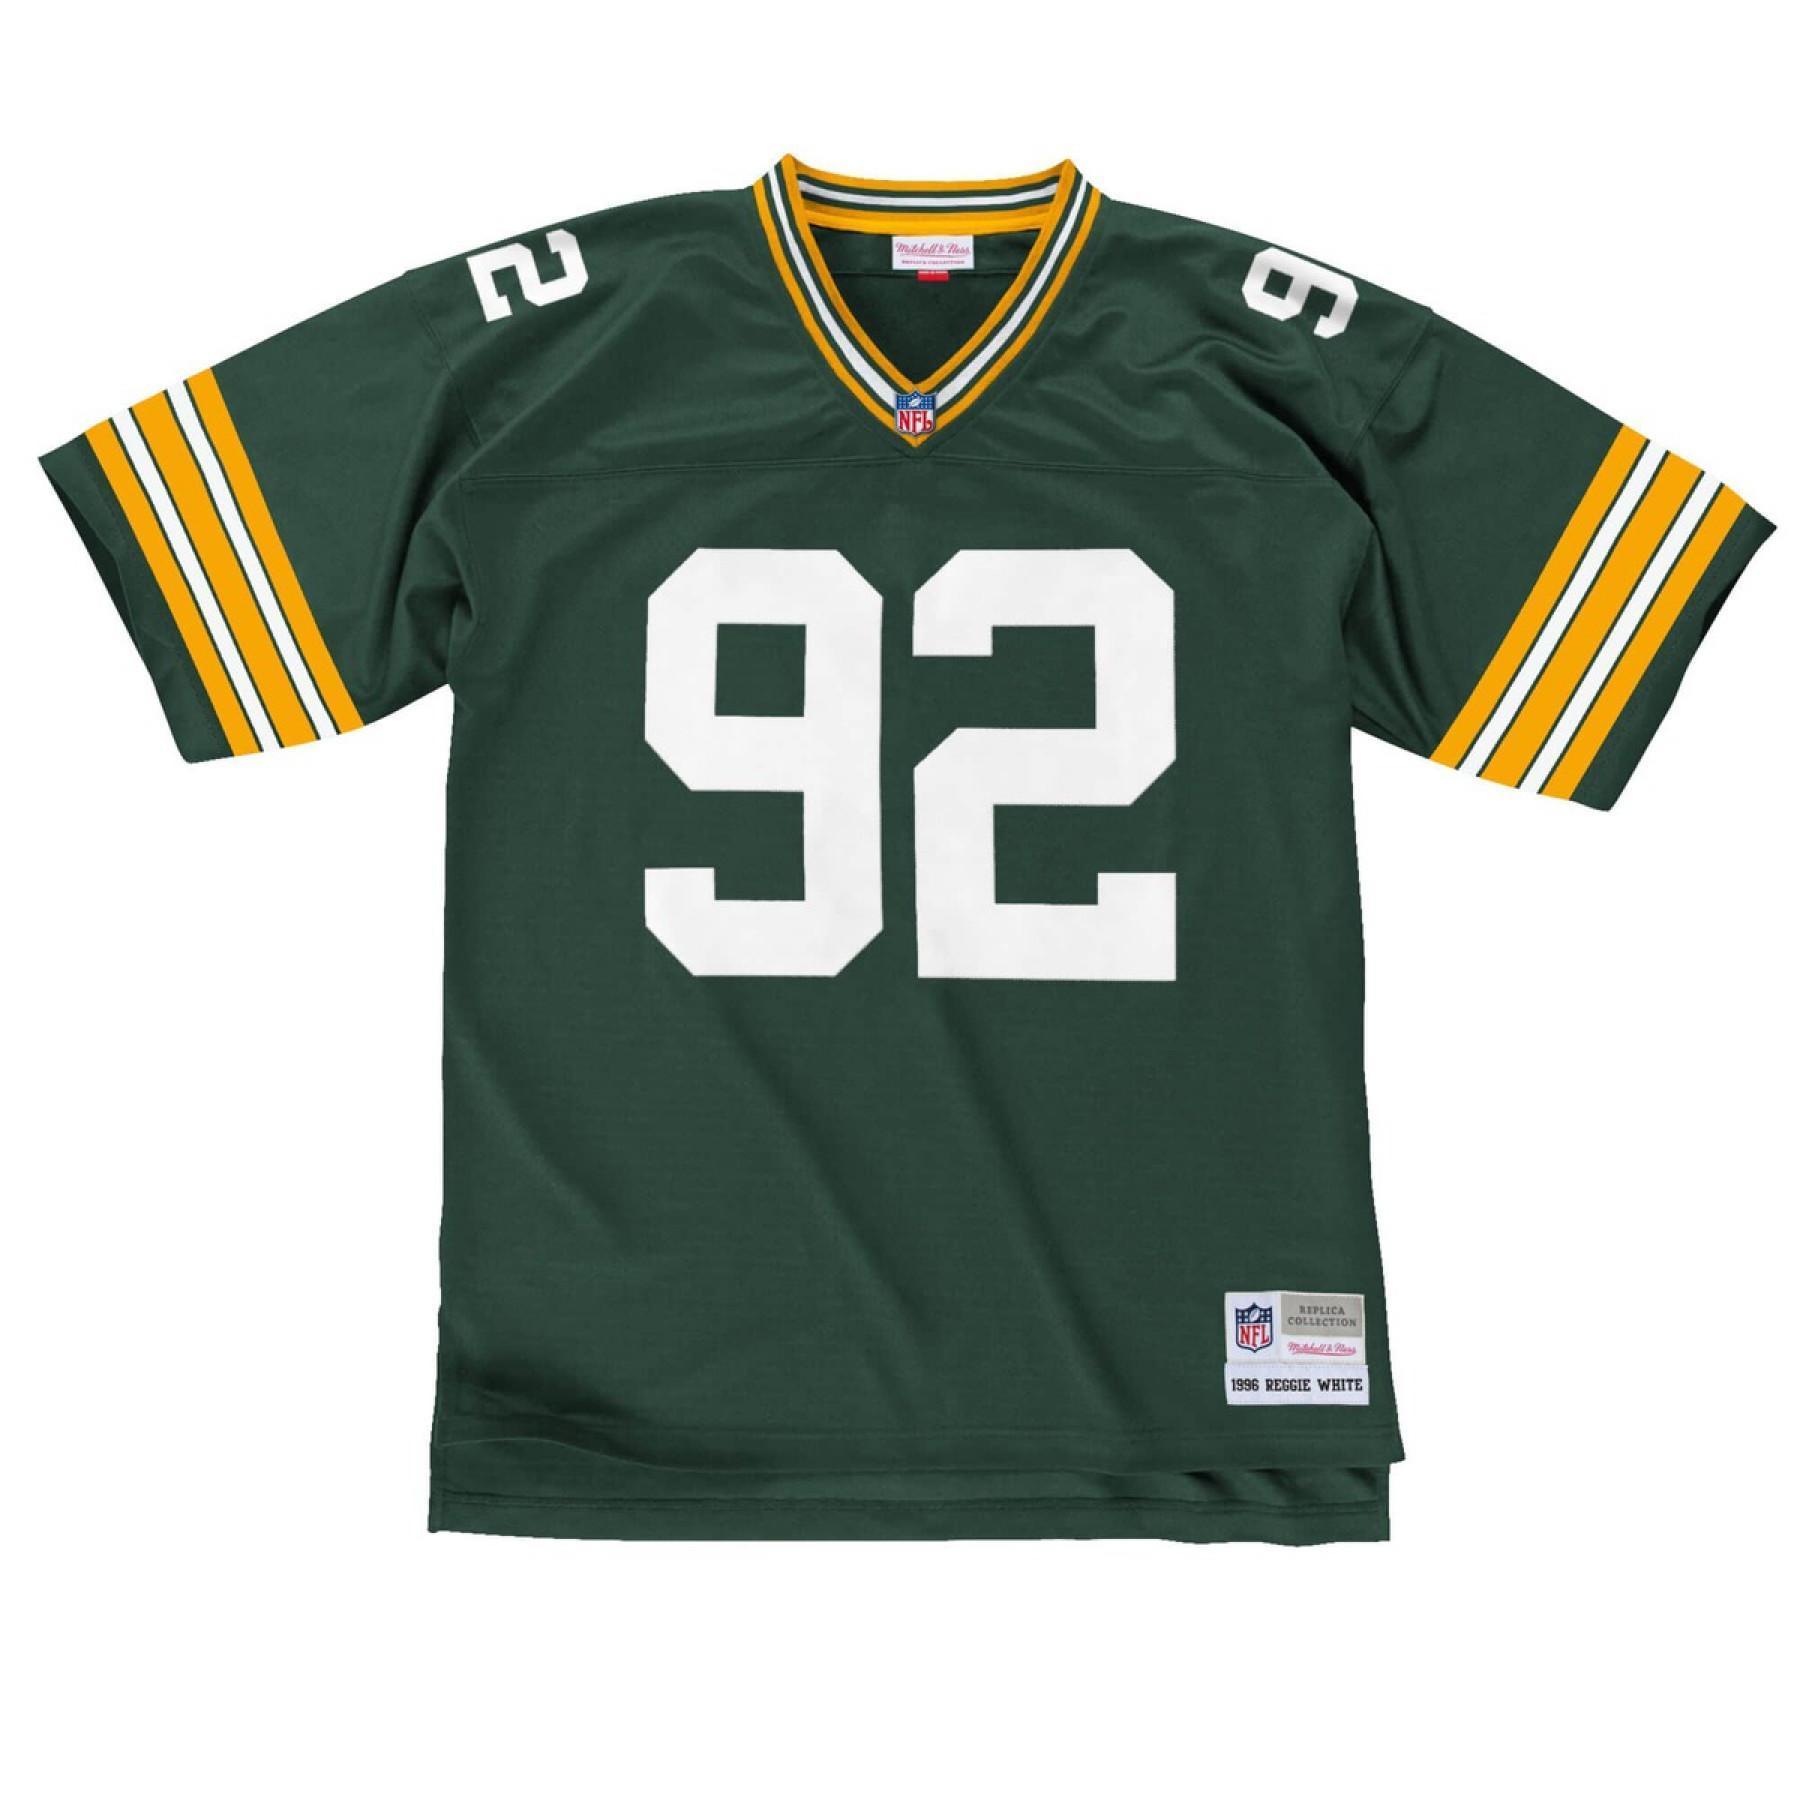 Camisola vintage Green Bay Packers